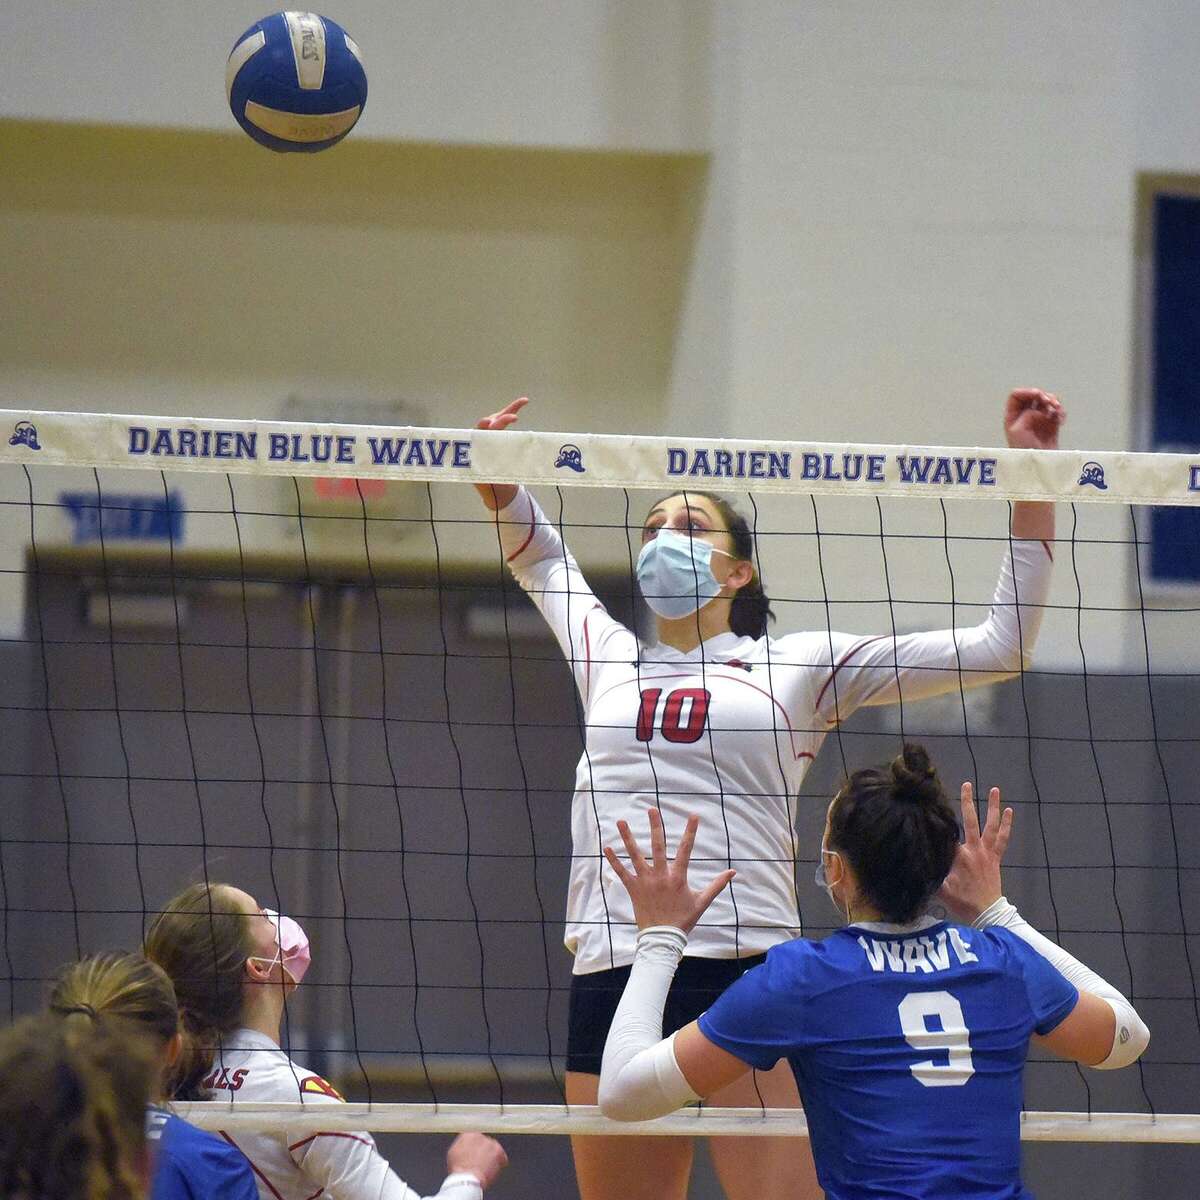 Greenwich's Liana Sarkissian (10) goes up for a shot during the Cardinals' girls volleyball match in Darien on Thursday, Oct. 29, 2020.